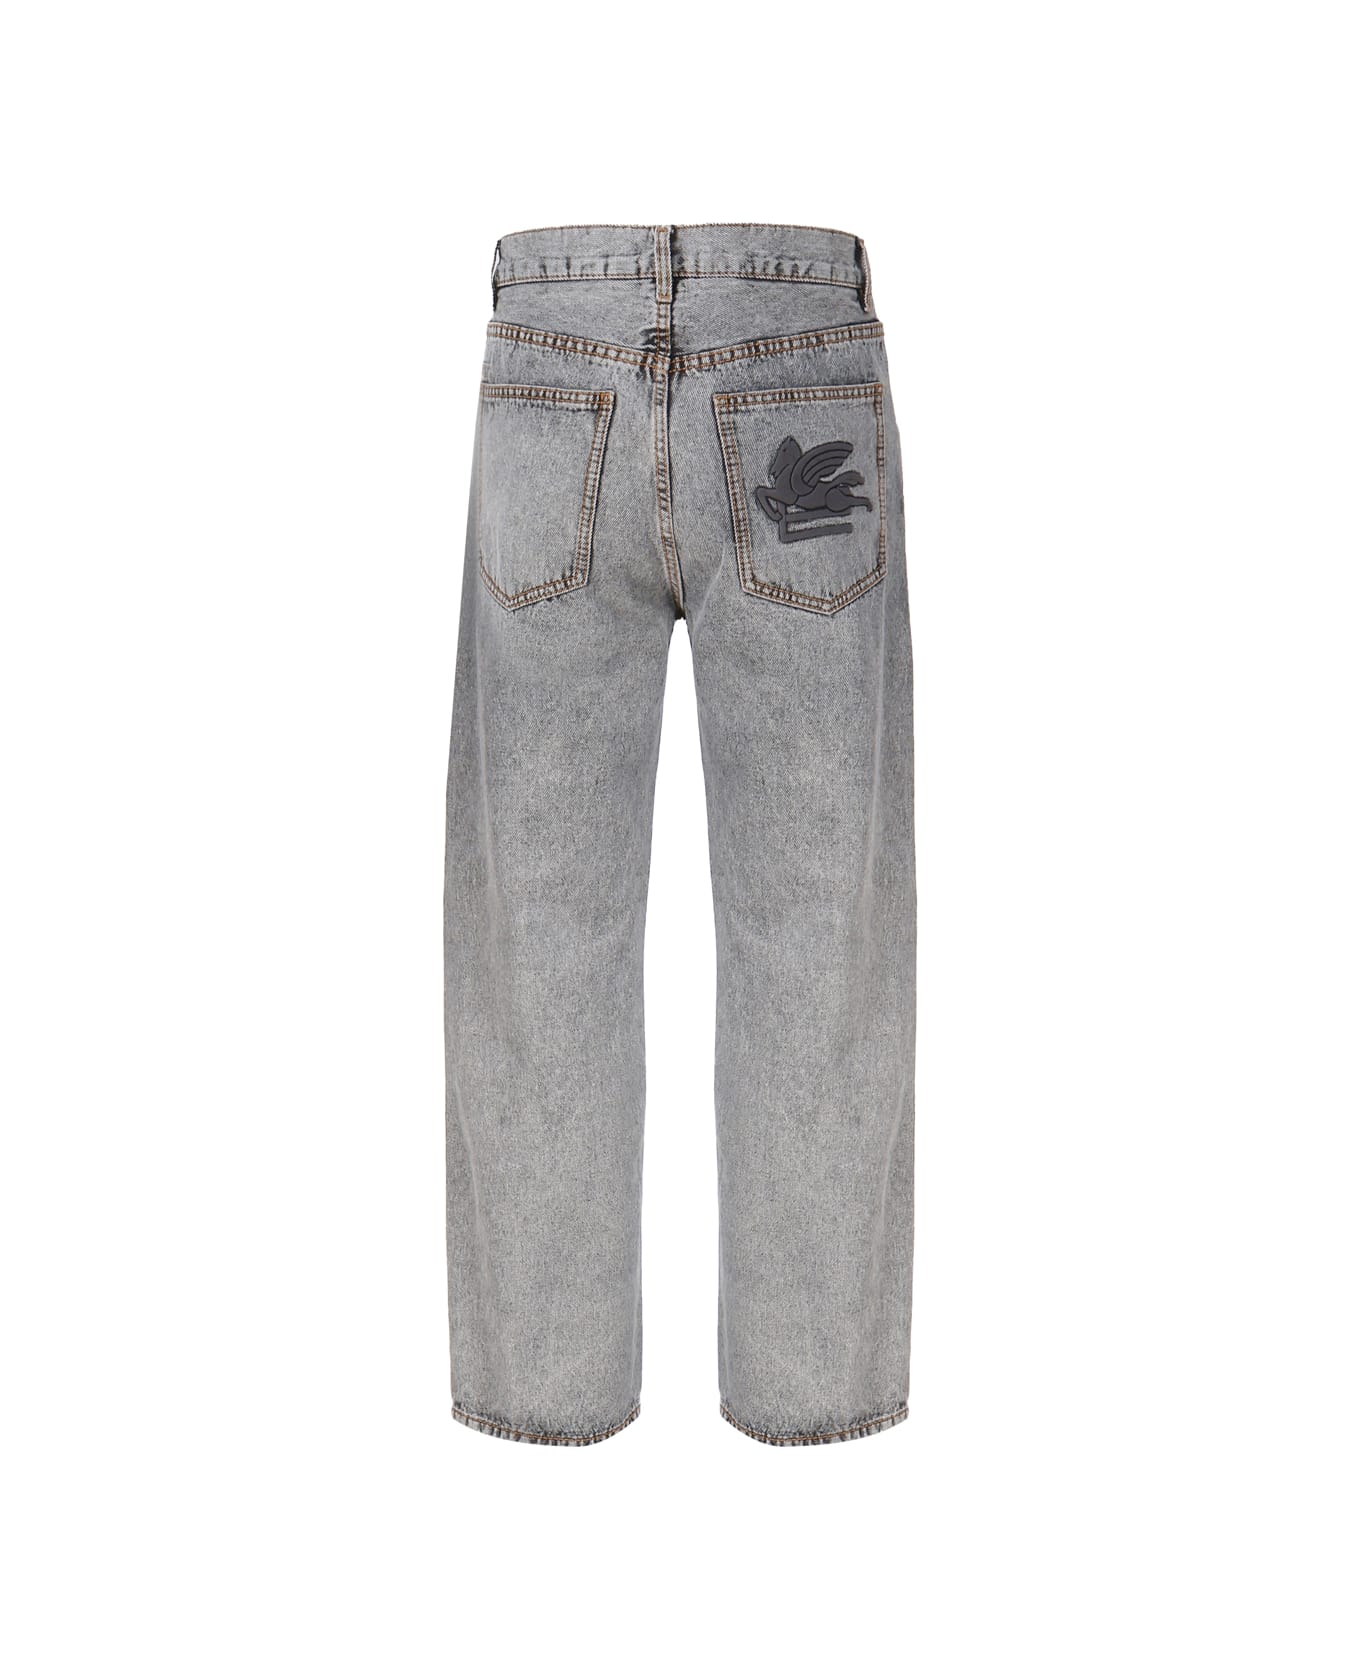 Etro Cotton Jeans With Lightened Wash - Grey